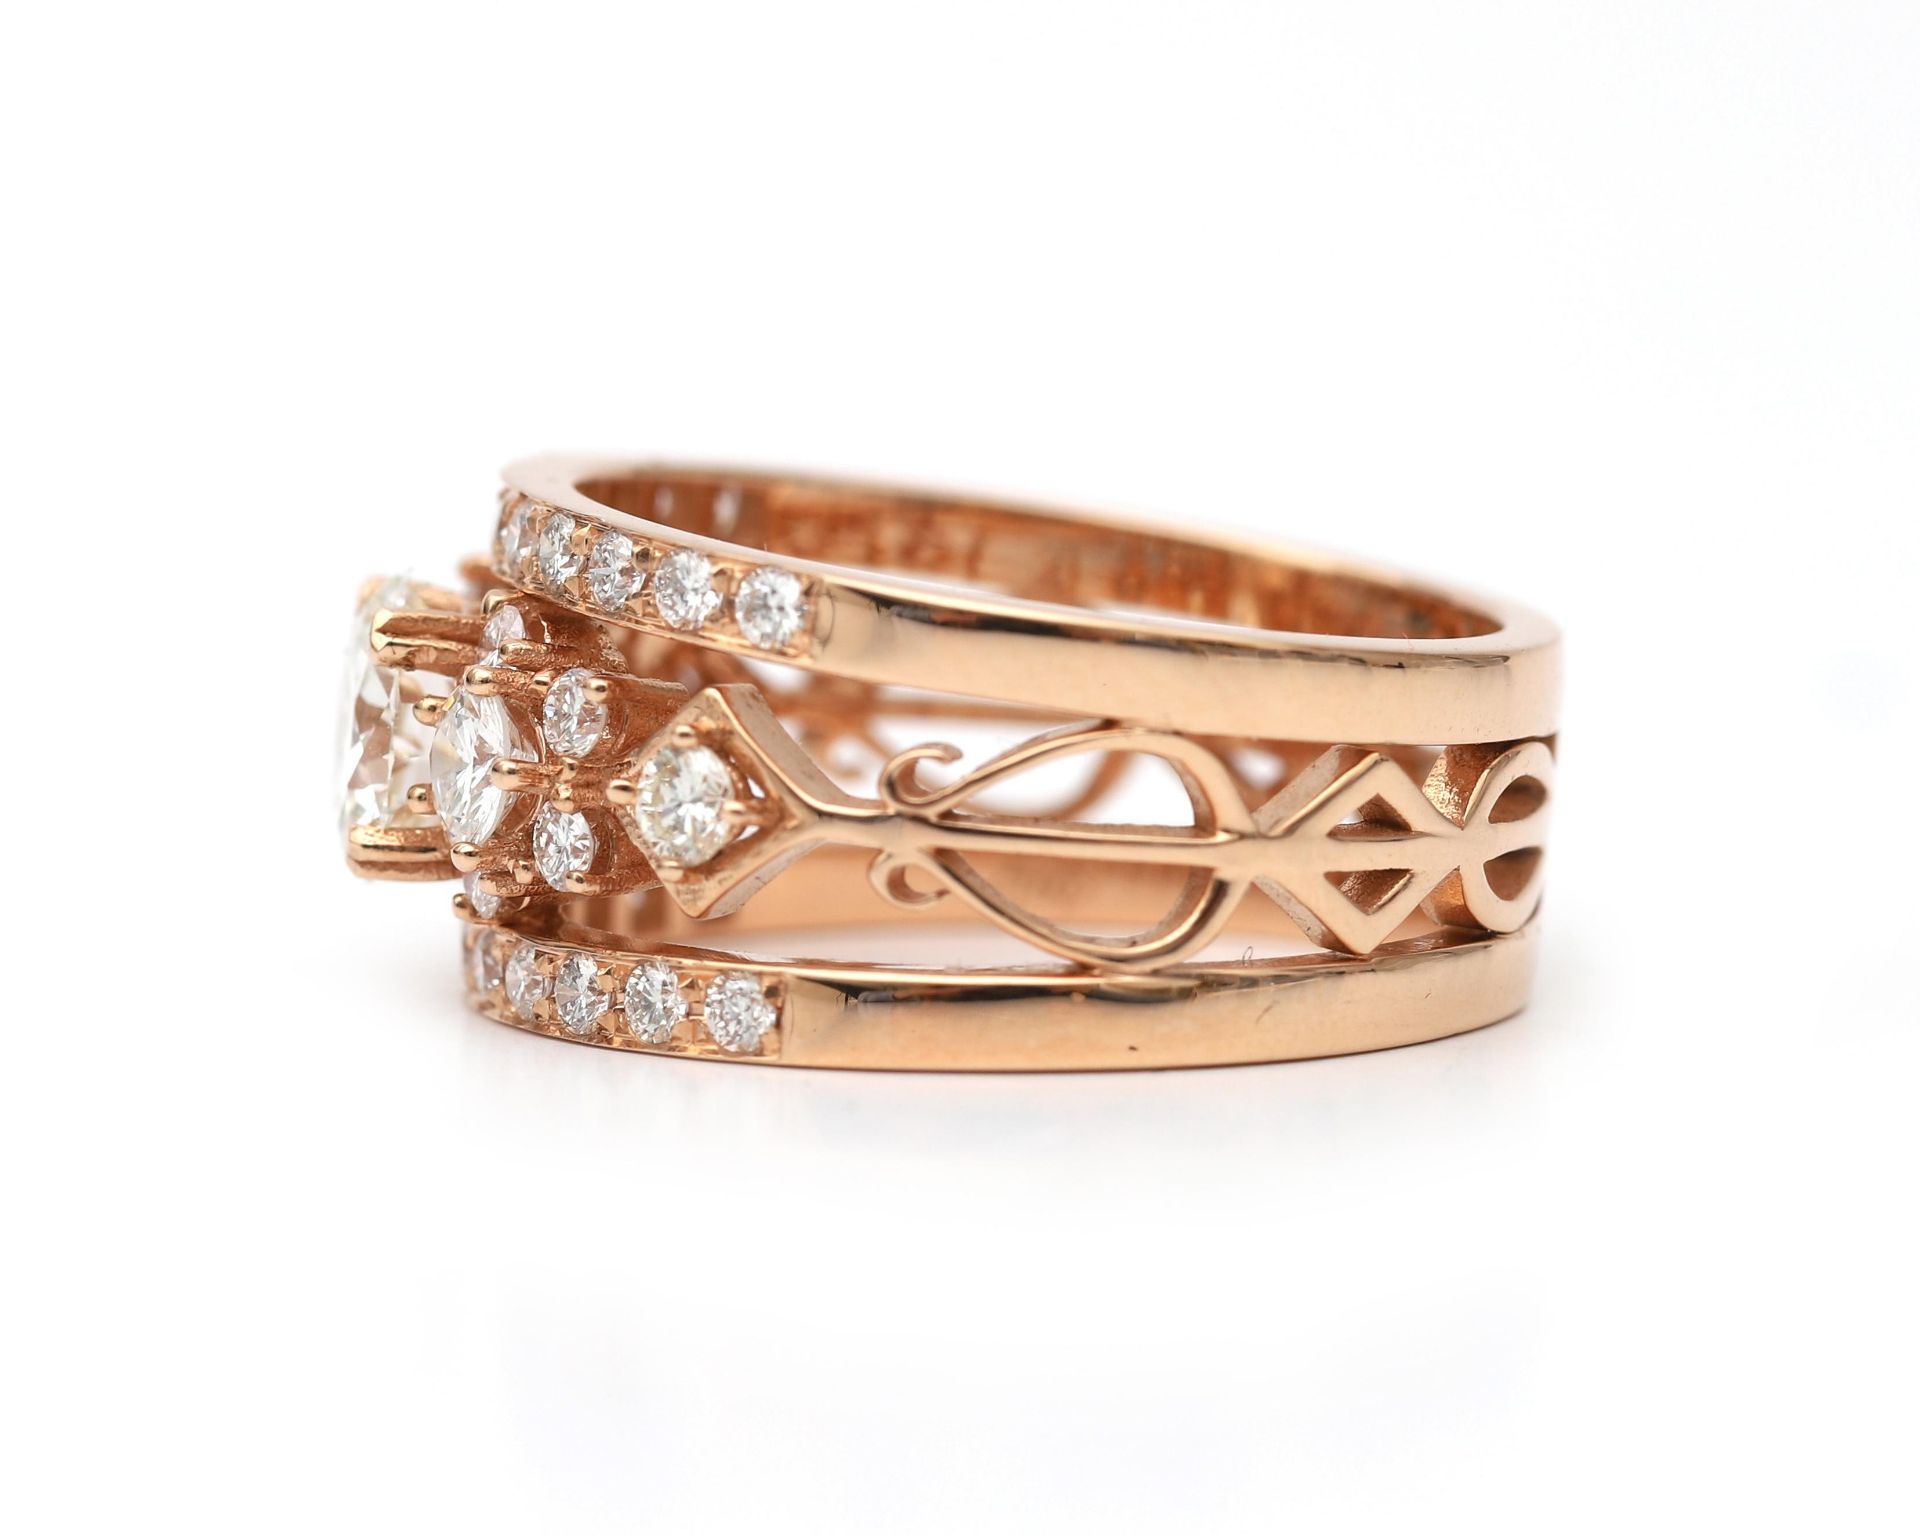 An 18 karat rose gold harp ring with diamond. With GIA certificate - Image 3 of 5